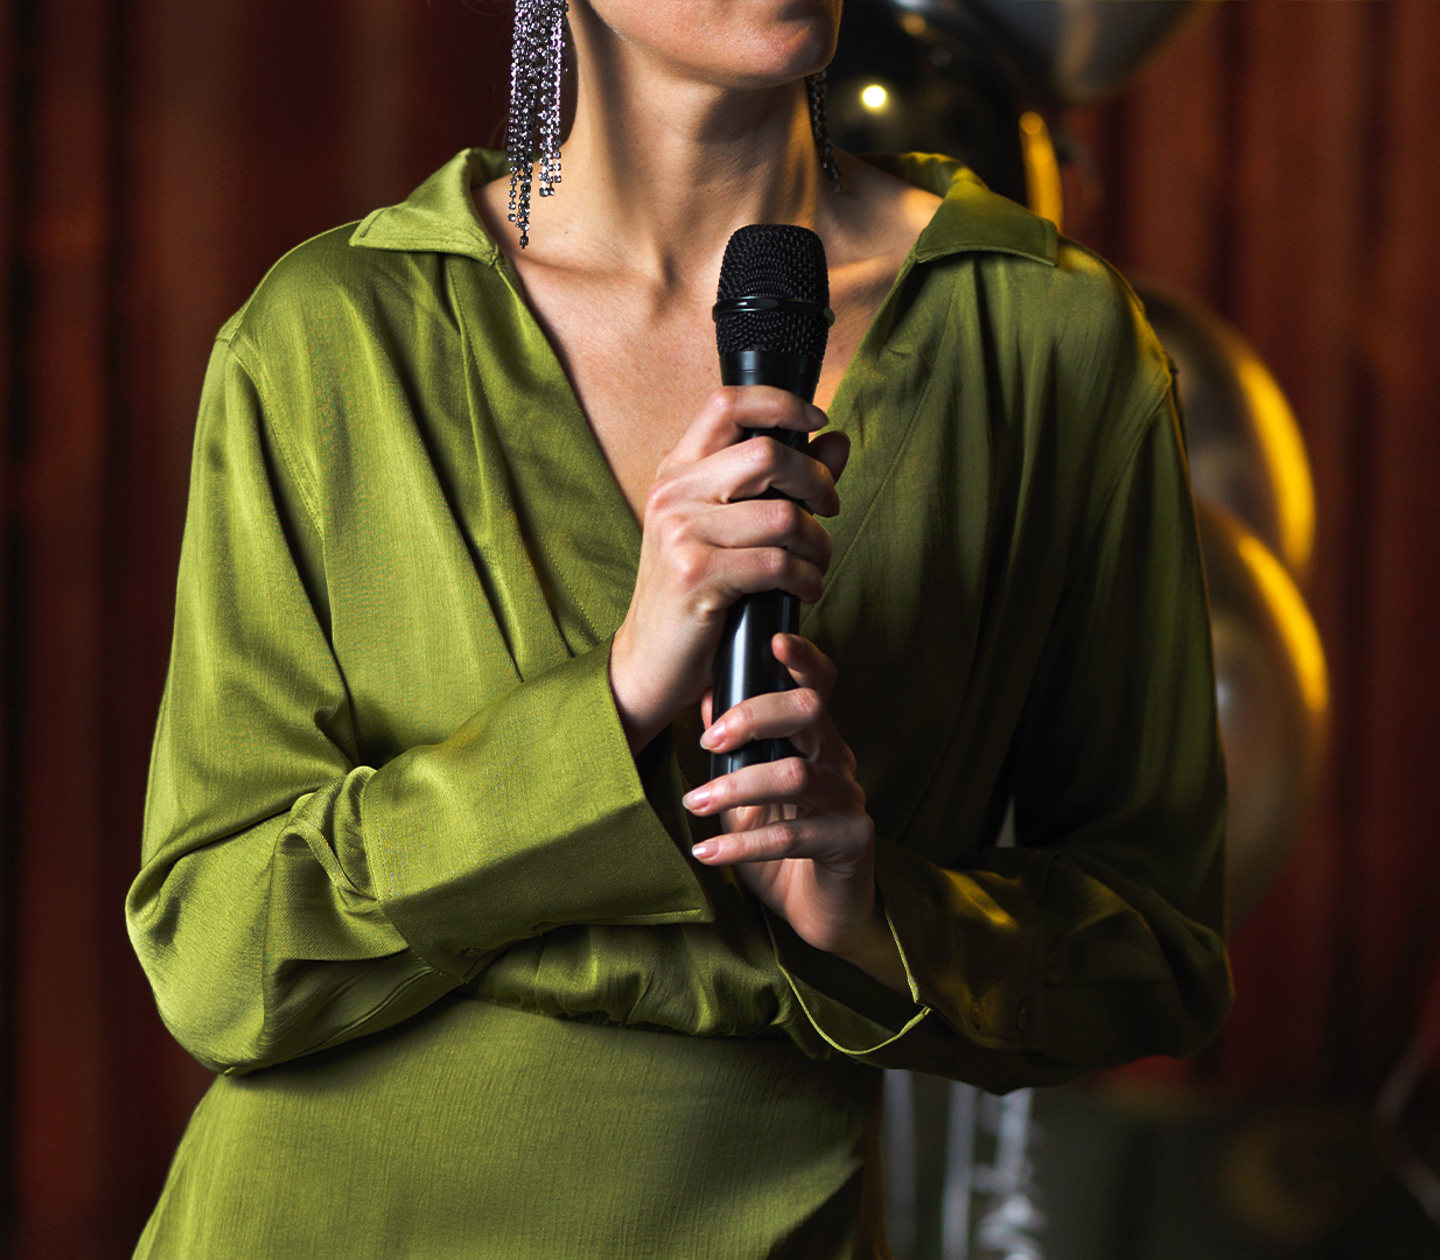 Woman in green dress is holding a microphone